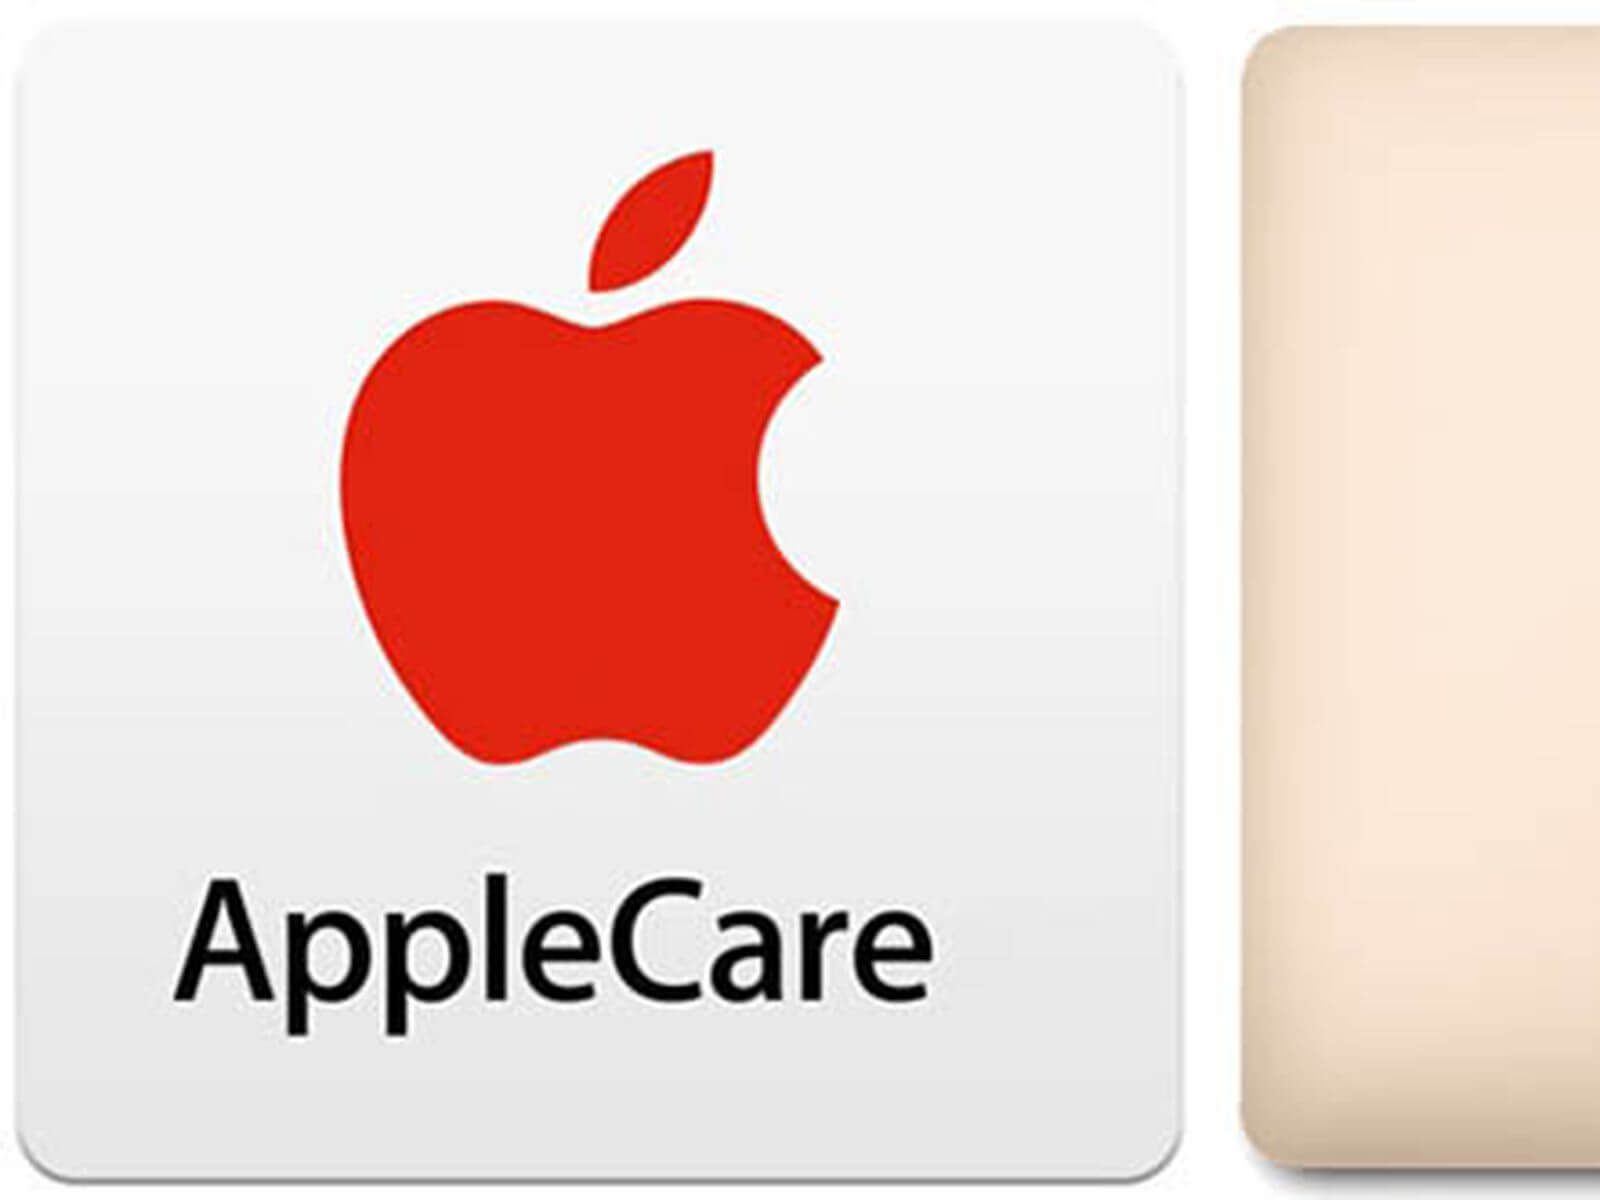 How to Cancel Applecare And Get Refund